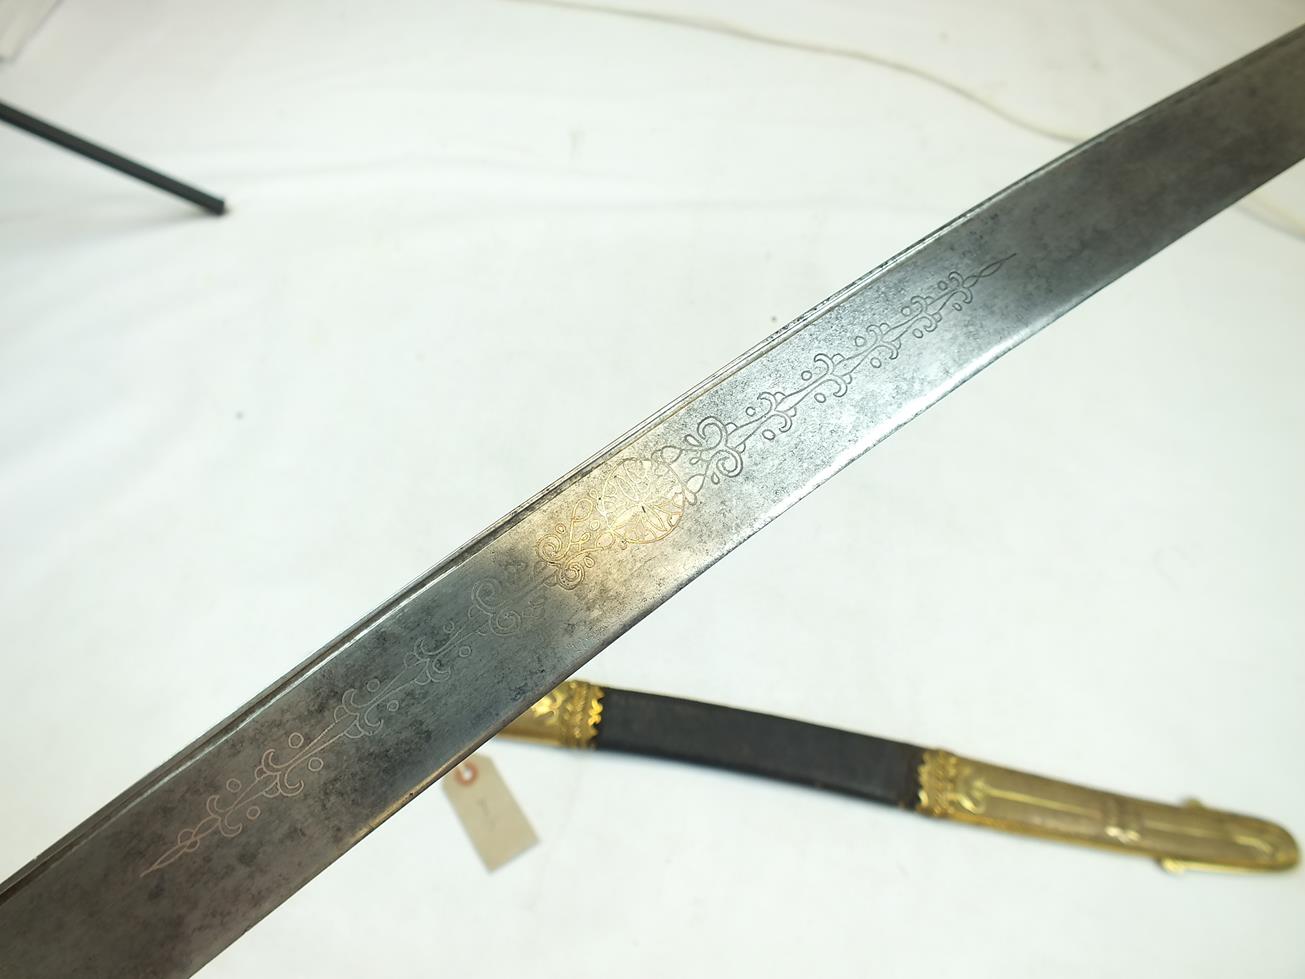 AN HIGHLY UNUSUAL PRESENTATION QUALITY MAMELUKE HILTED DIRK MOUNTED WITH A YATAGHAN BLADE BY SALTER, - Image 15 of 26